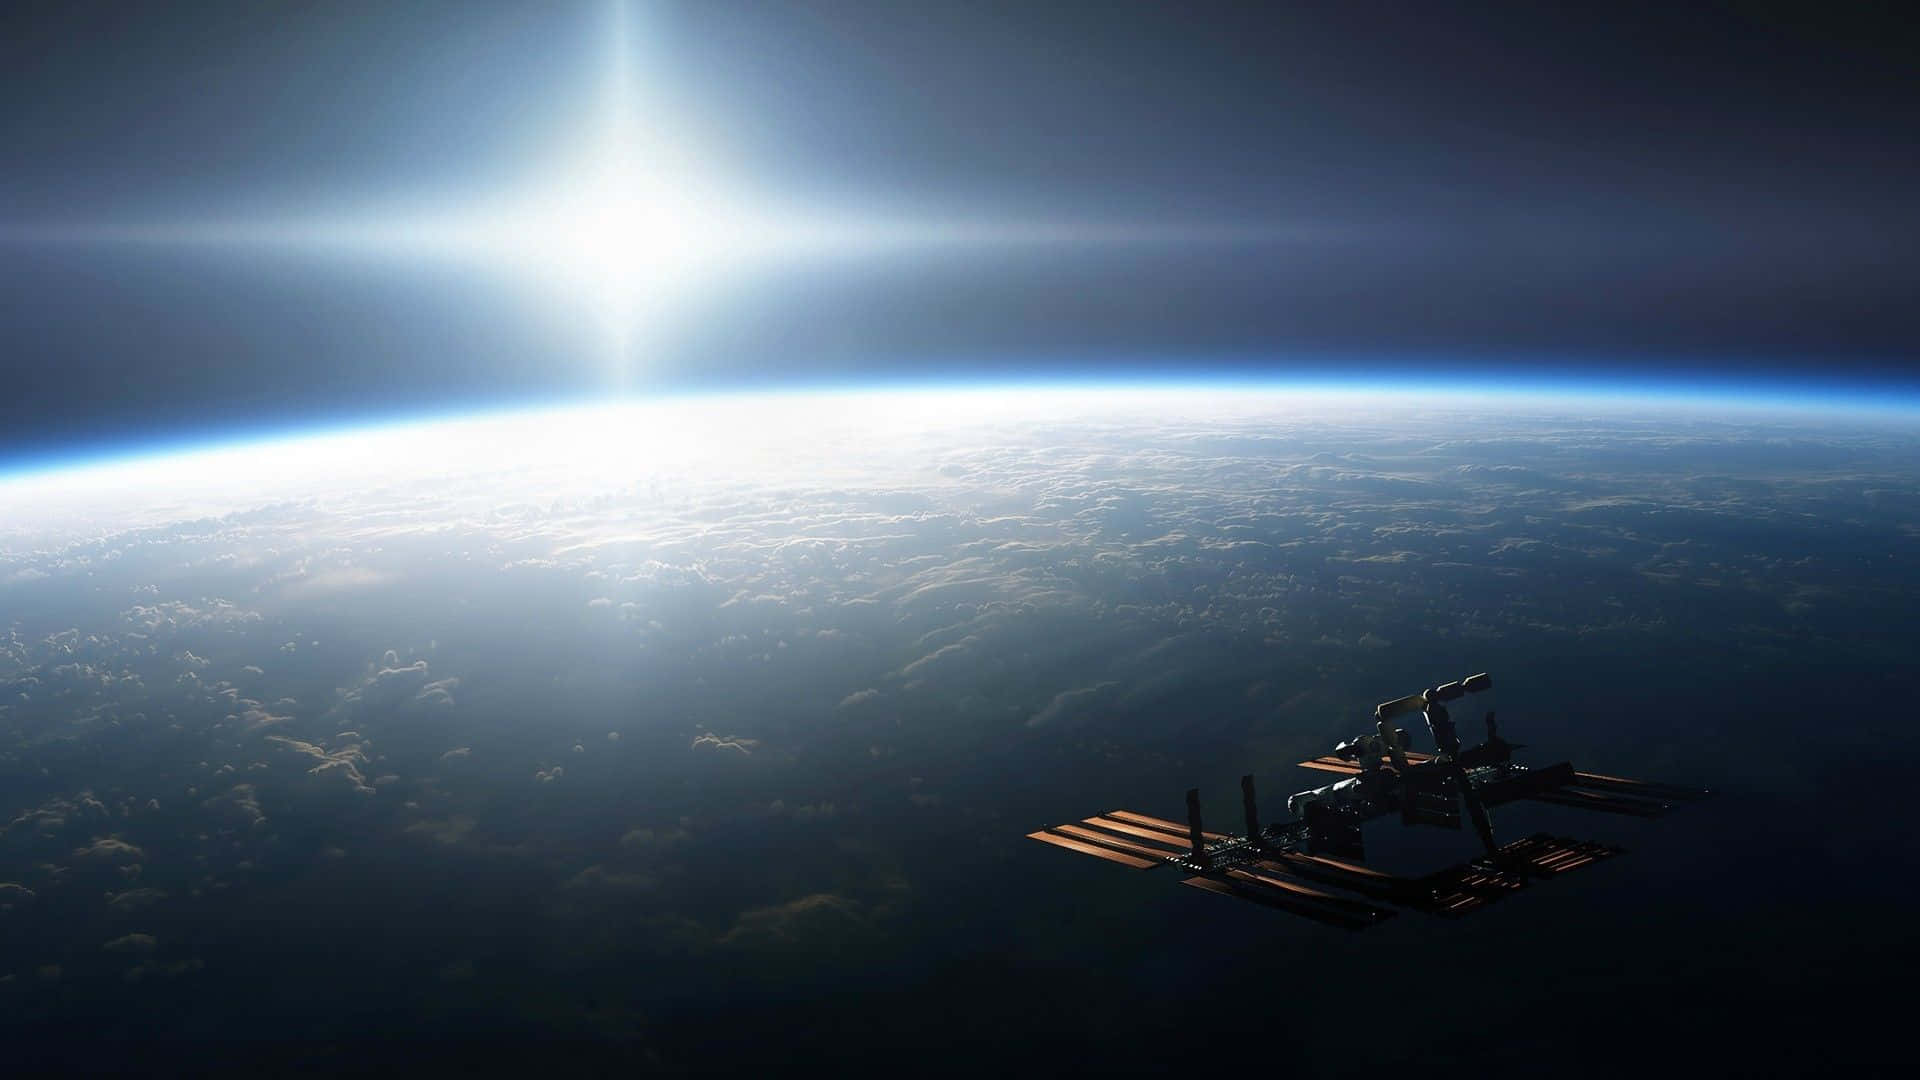 an image of an international space station in space